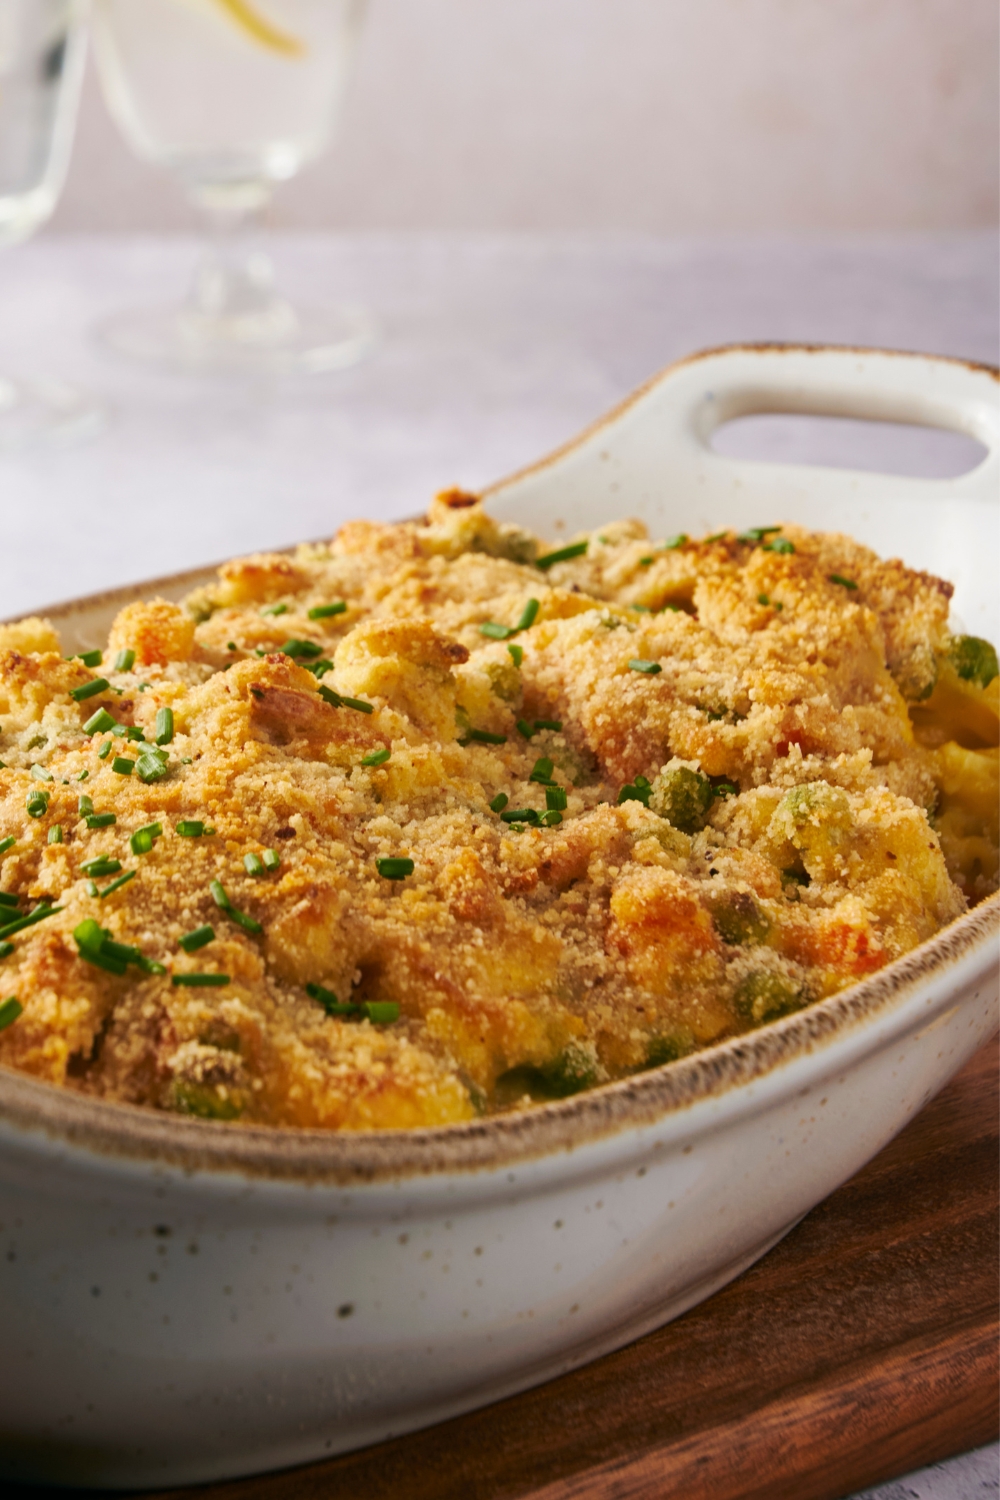 A casserole dish with chicken noodle casserole in it.